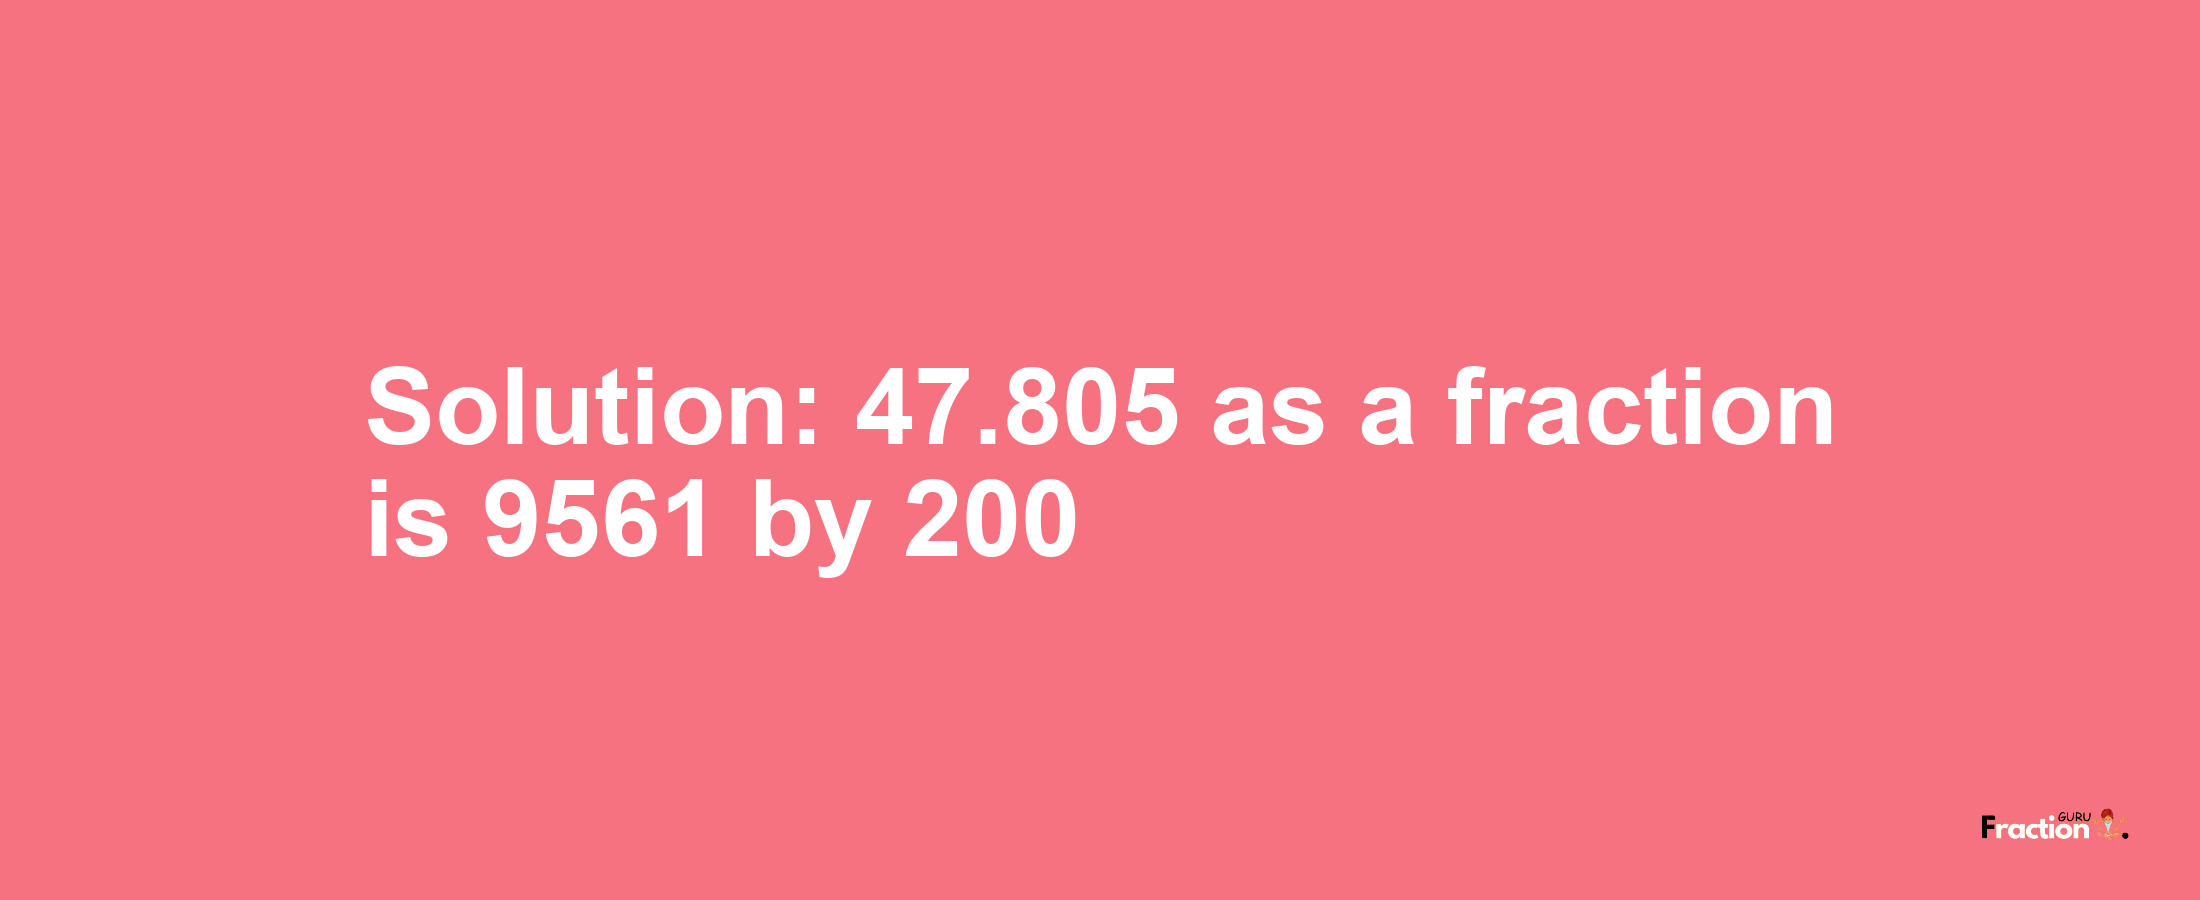 Solution:47.805 as a fraction is 9561/200